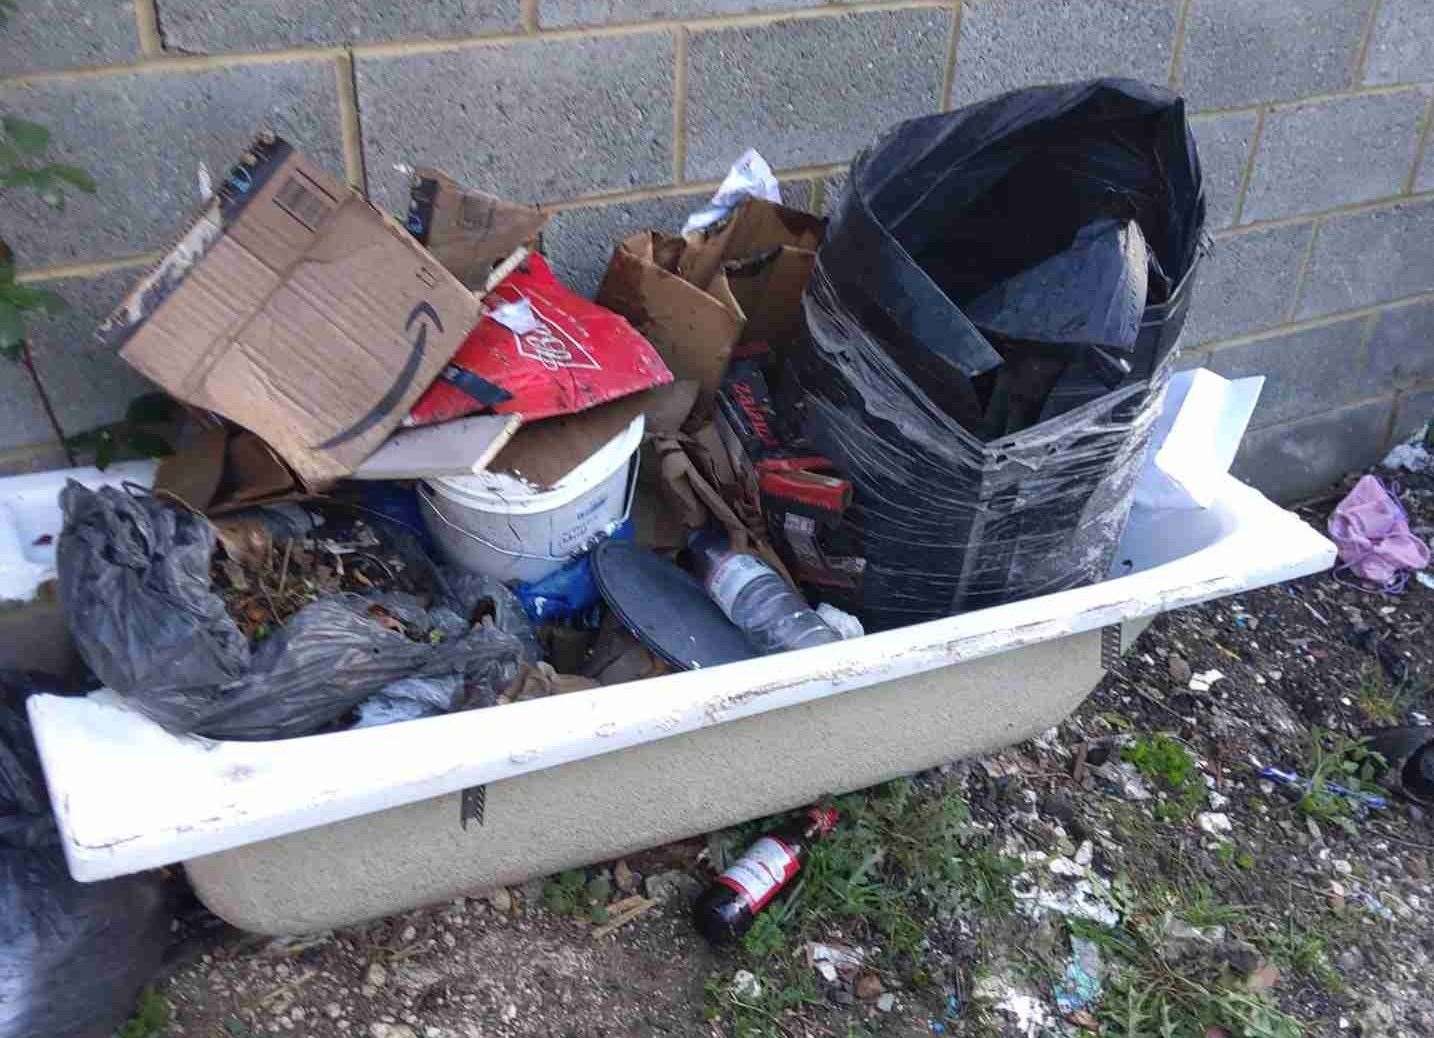 A bathtub filled with rubbish bags was found in Otway Street, Chatham. Picture: Medway Council